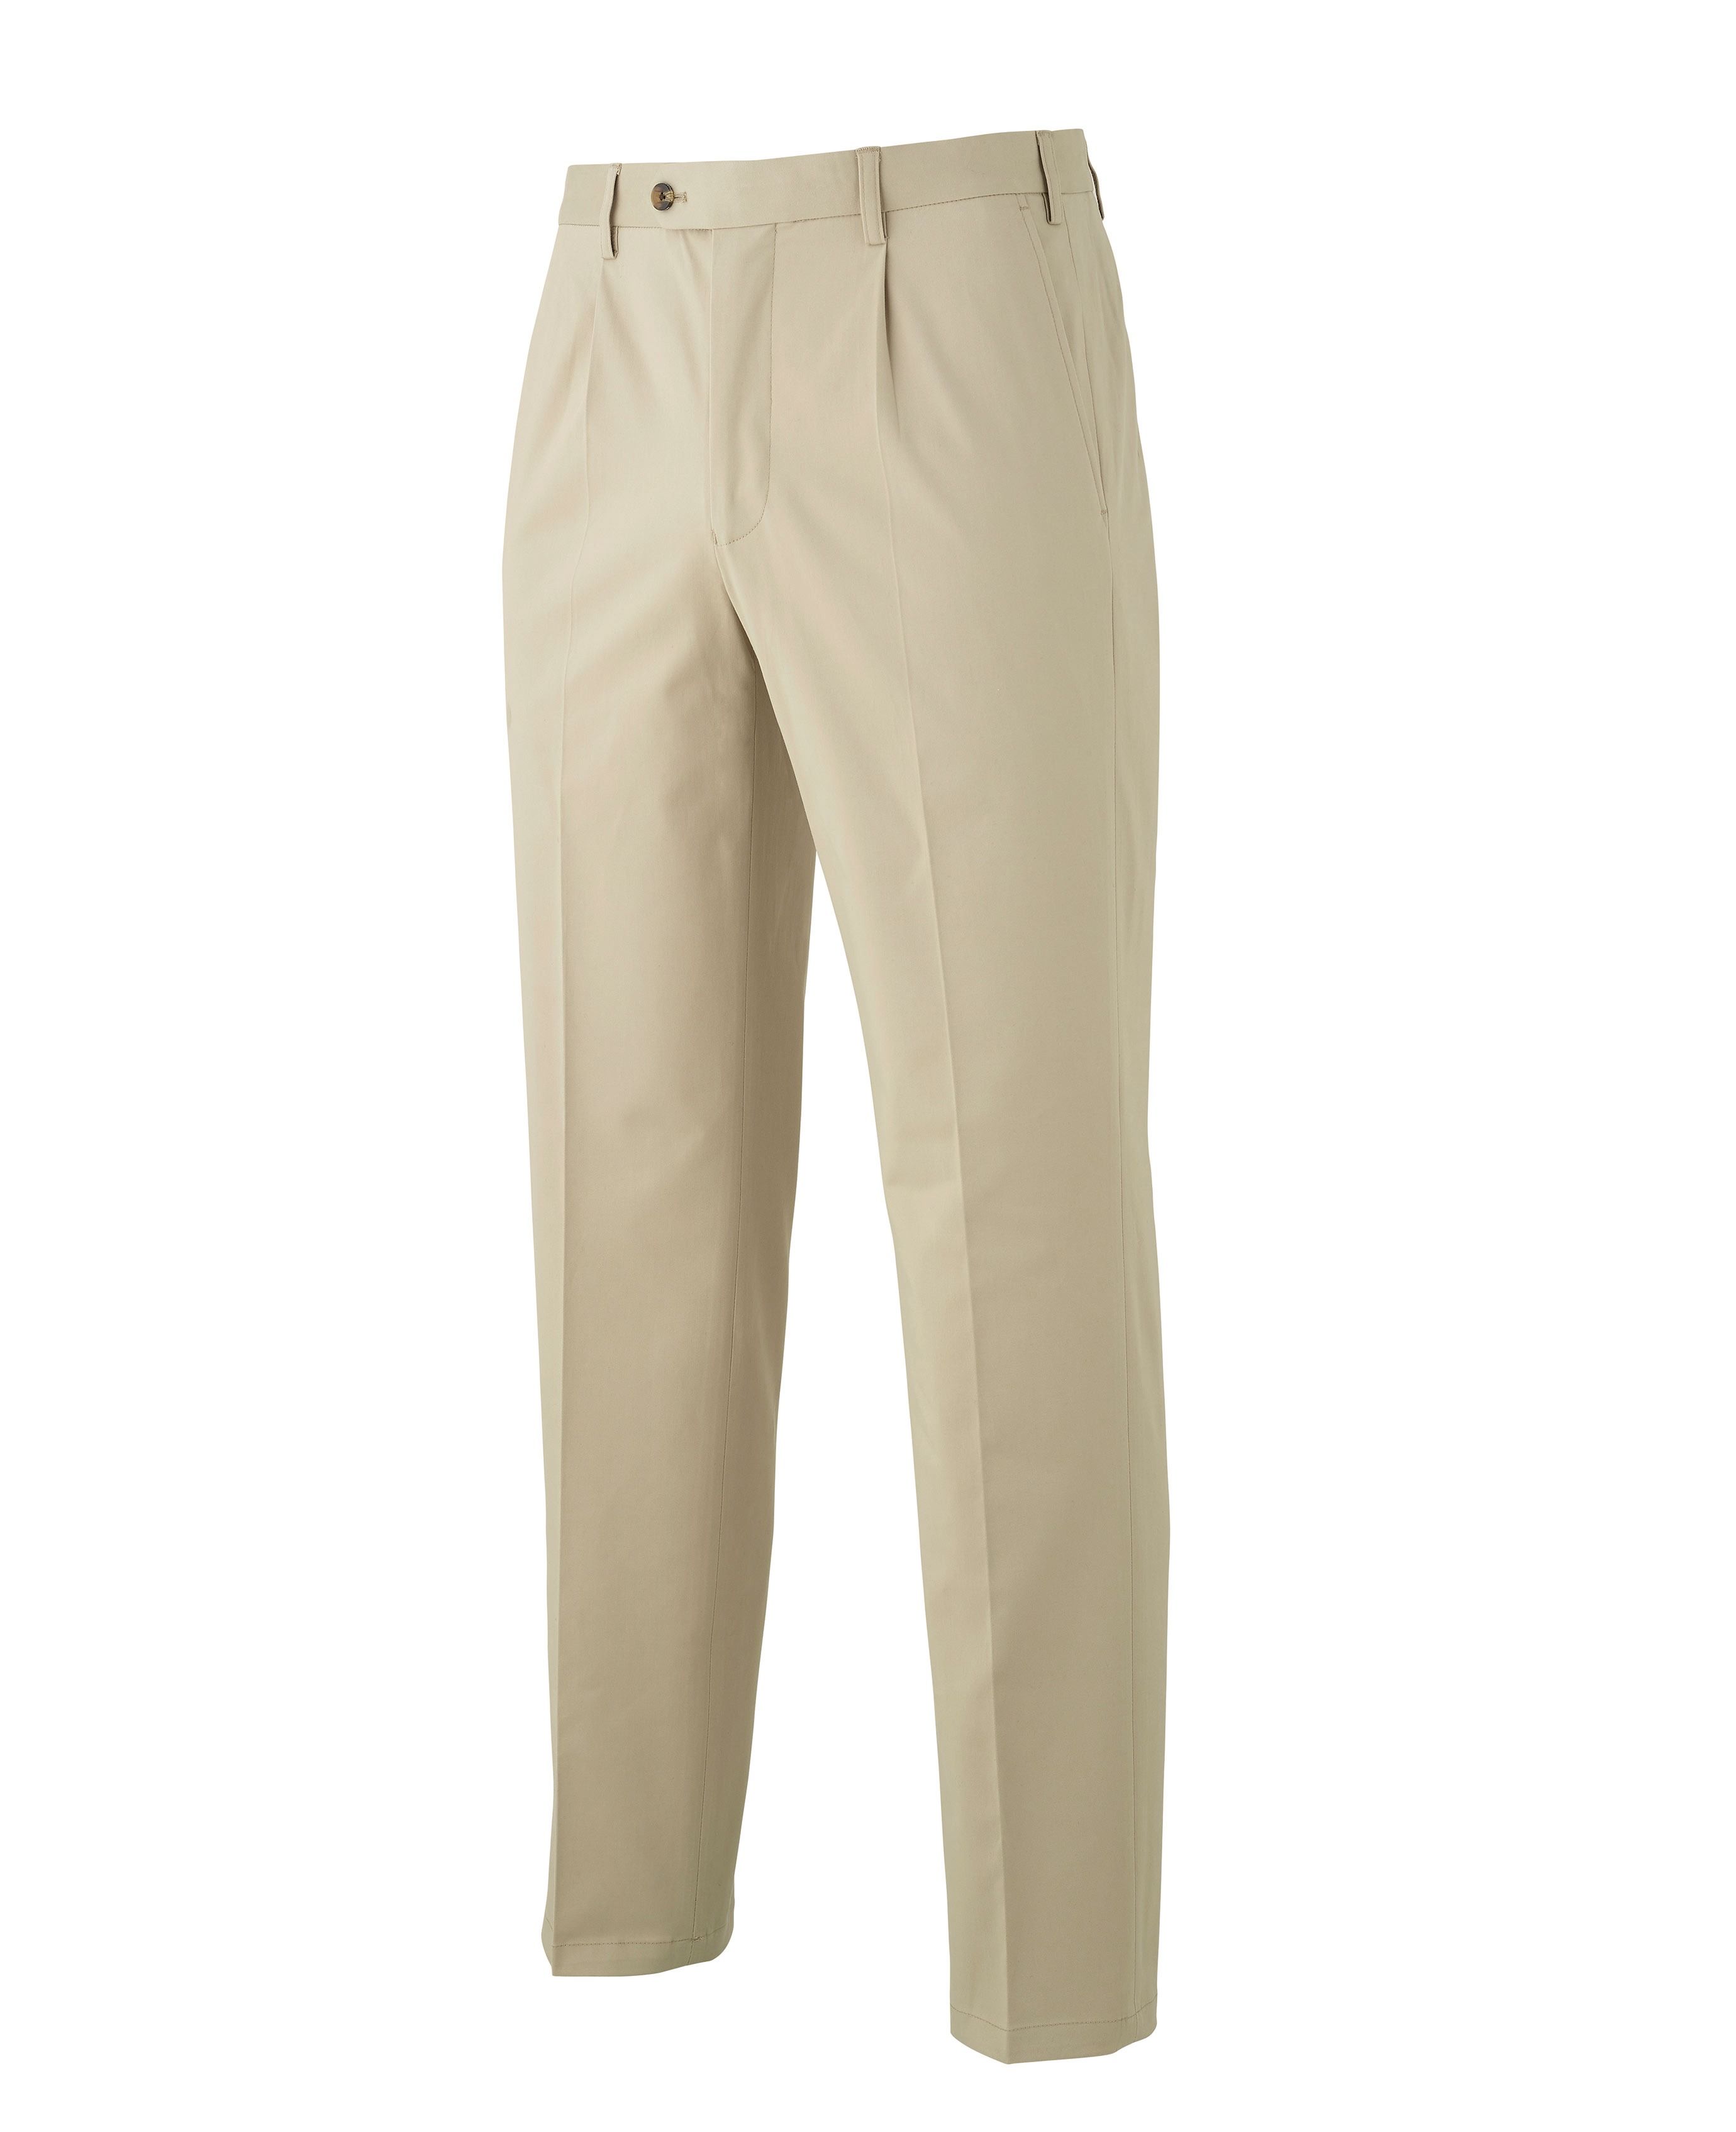 Men's Stone Pleat Front Stretch Cotton Classic Fit Chinos